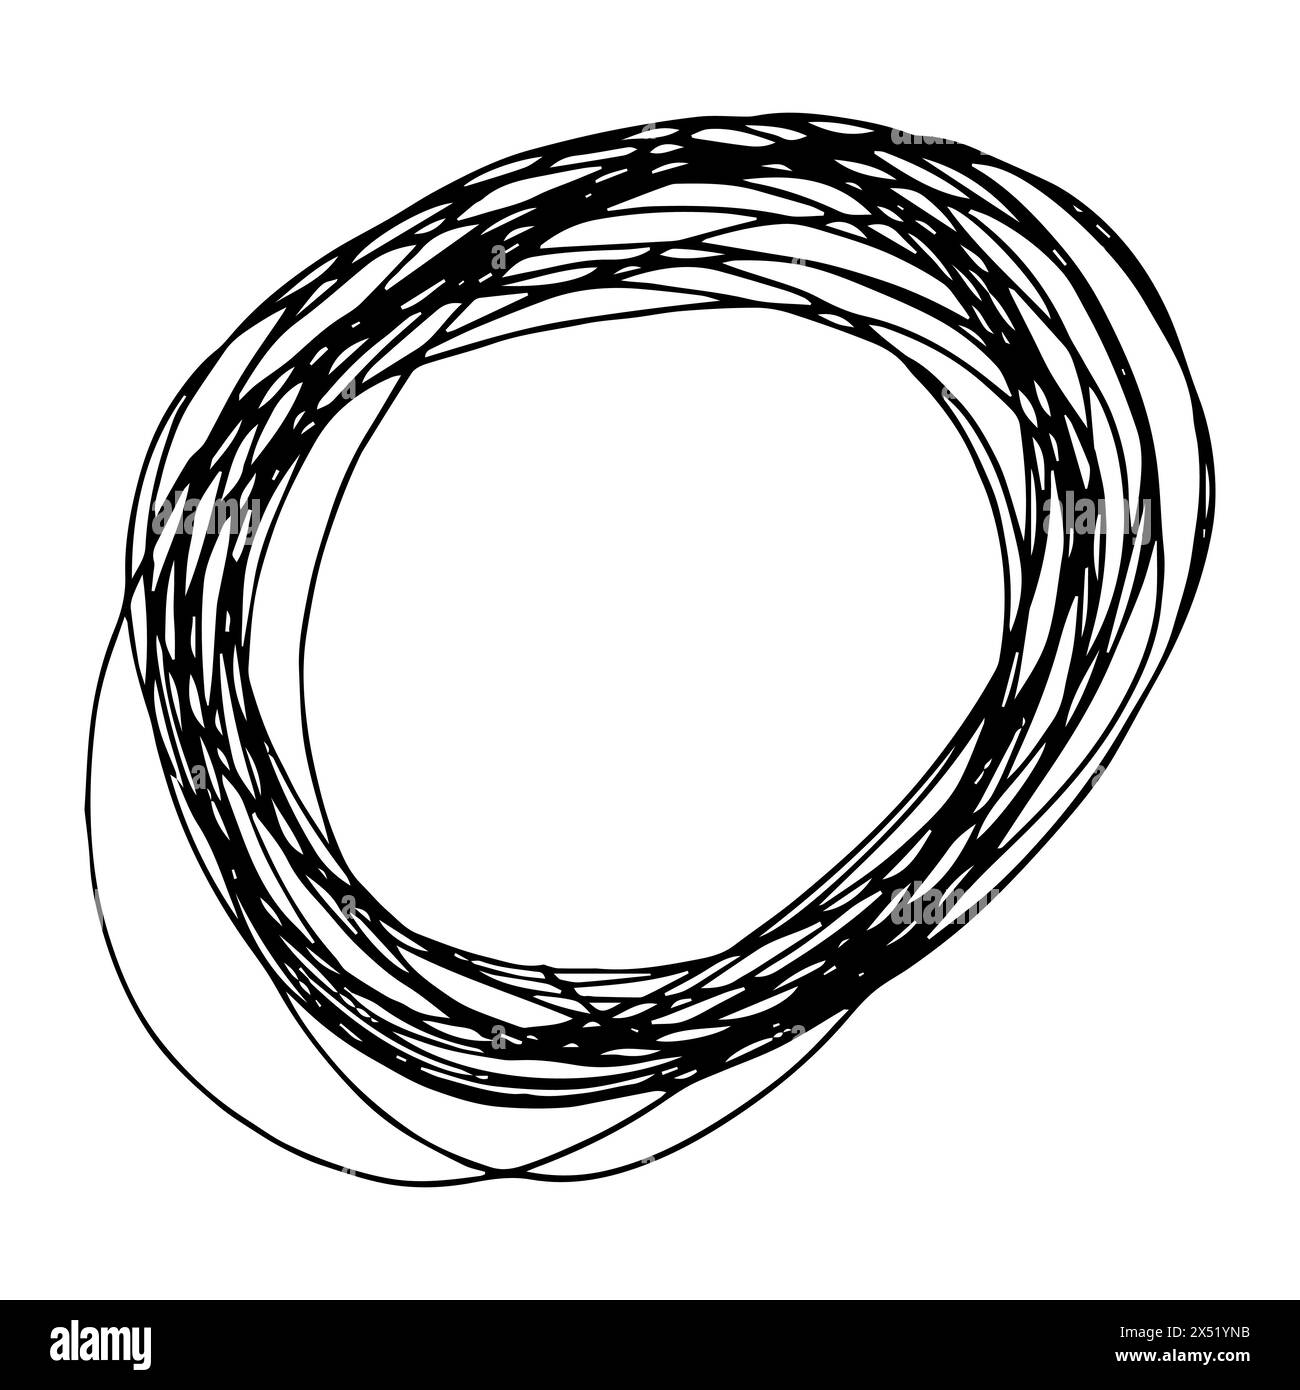 Sketch Hand drawn Ellipse Shape. Abstract Pencil Scribble Drawing. Vector illustration. Stock Vector